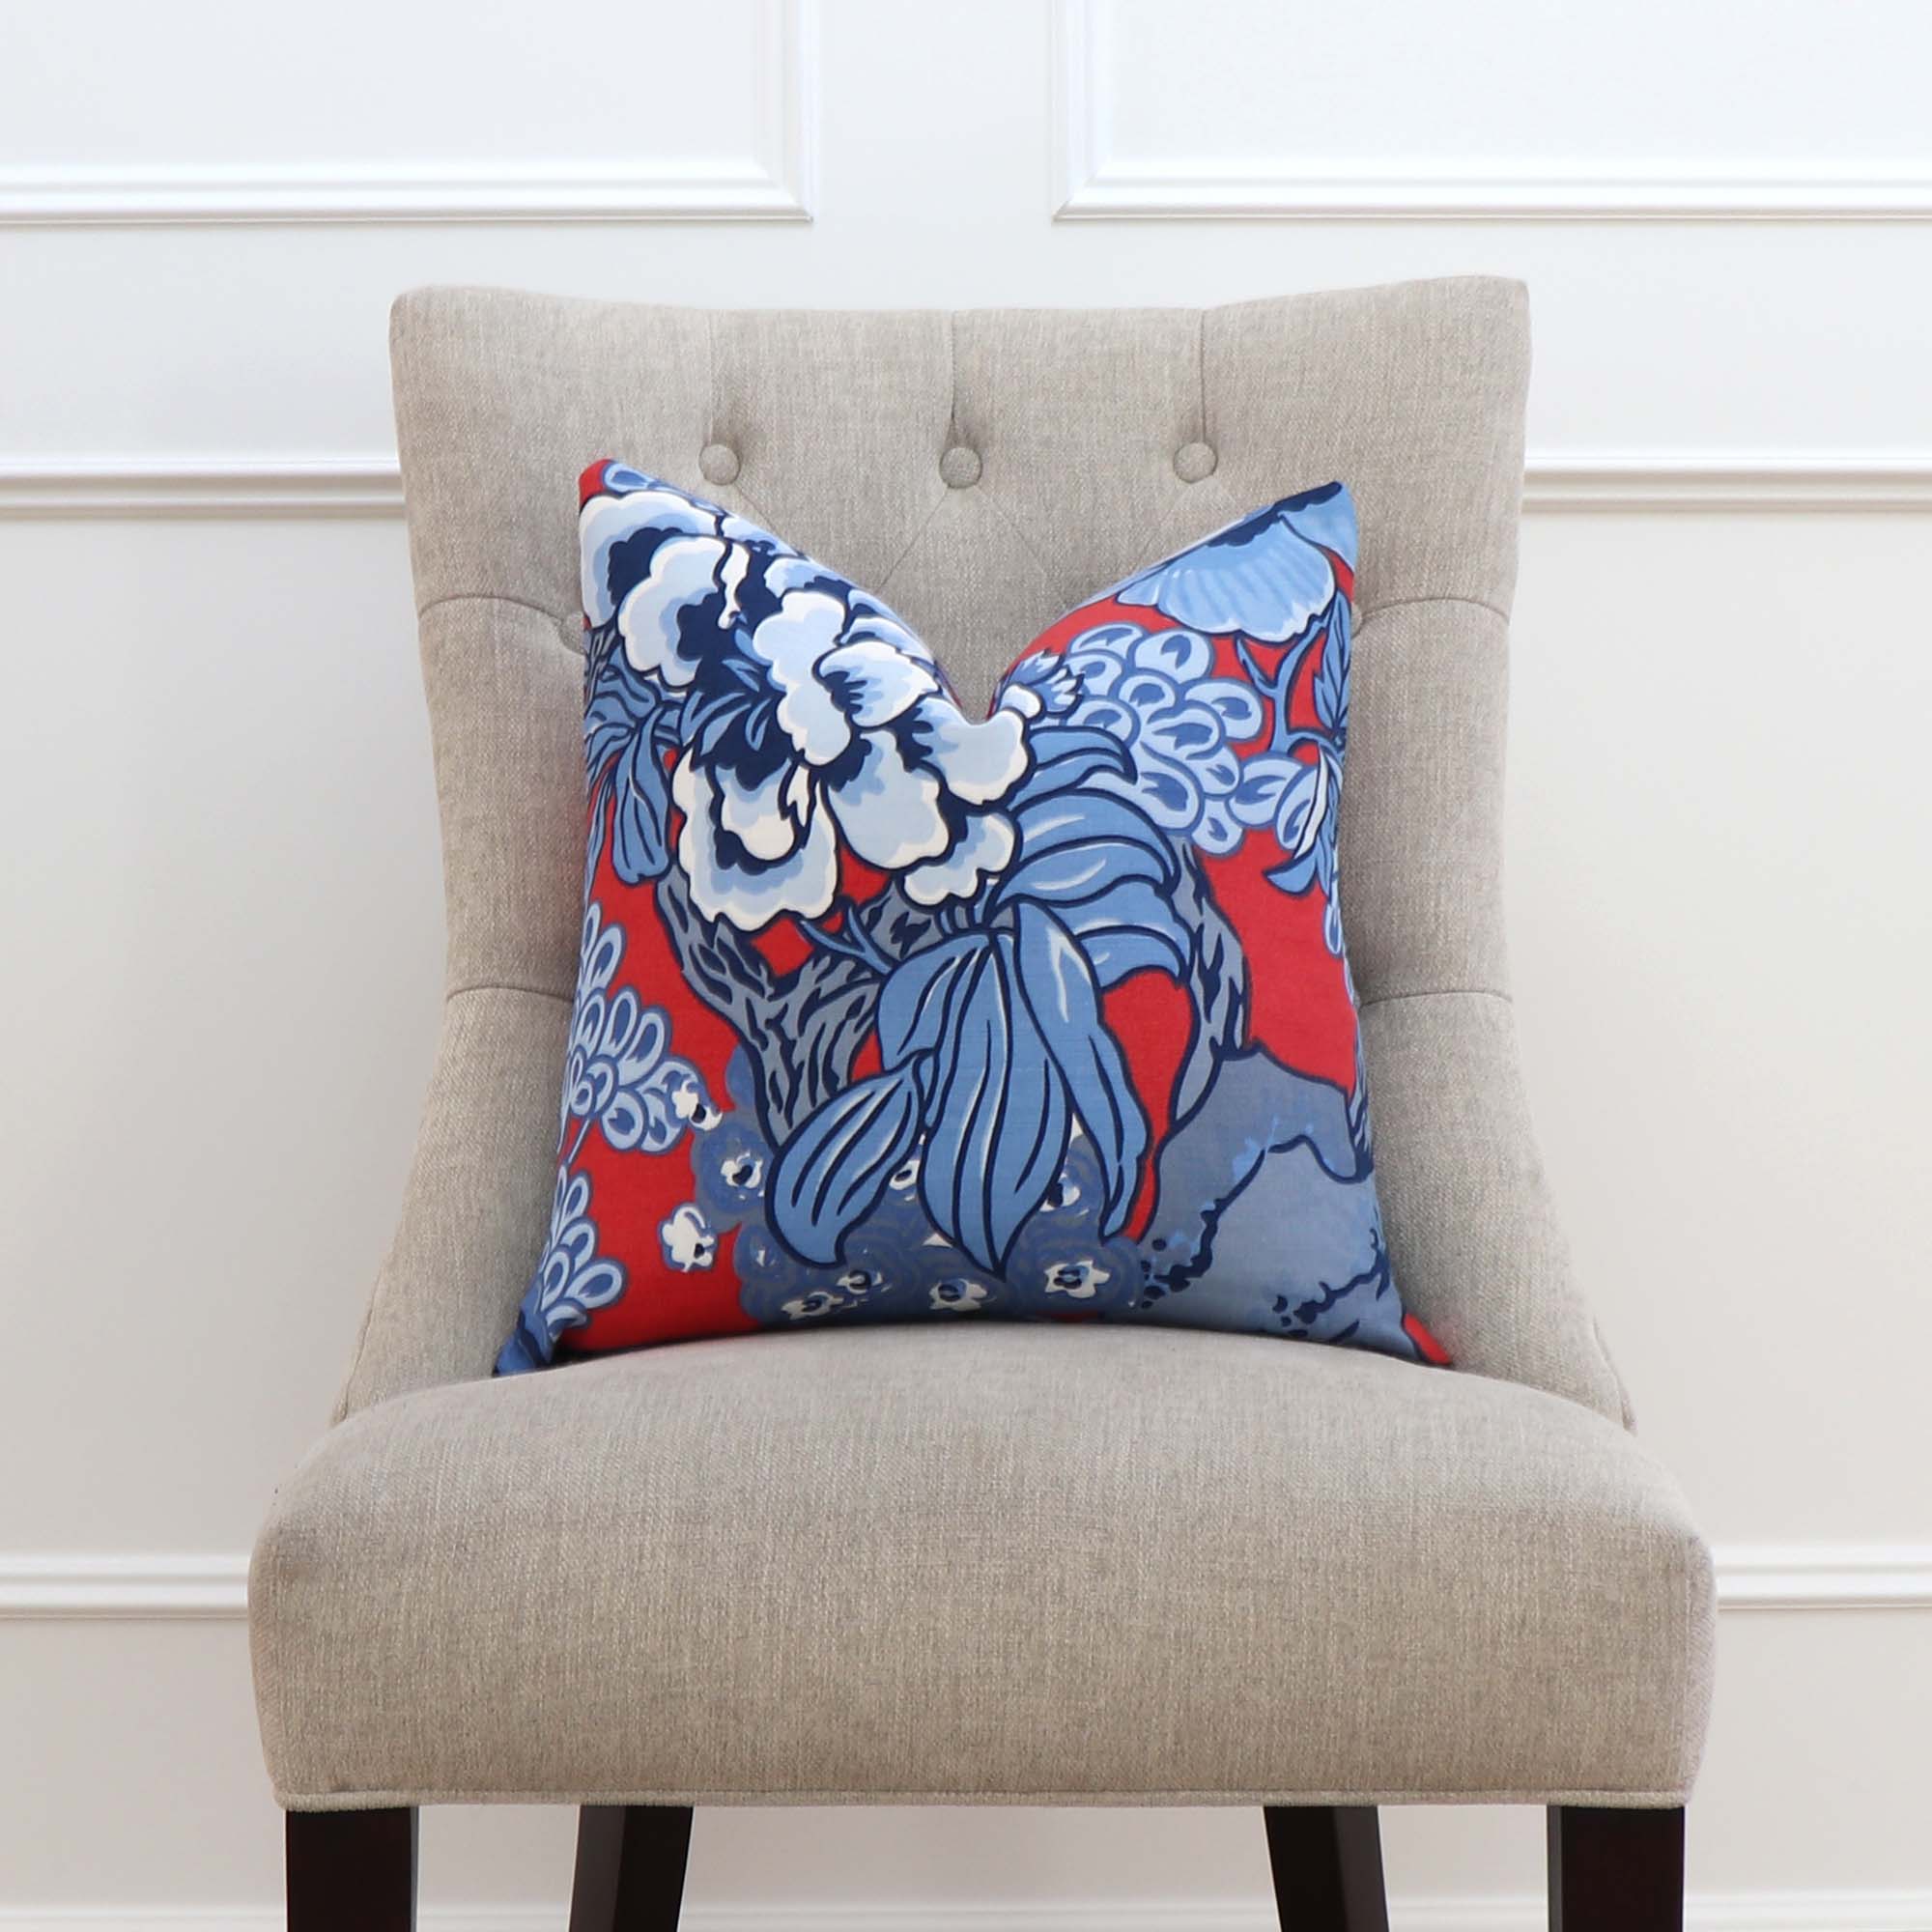 Thibaut Honshu Red and Blue Floral Decorative Designer Throw Pillow Cover on Chair in Home